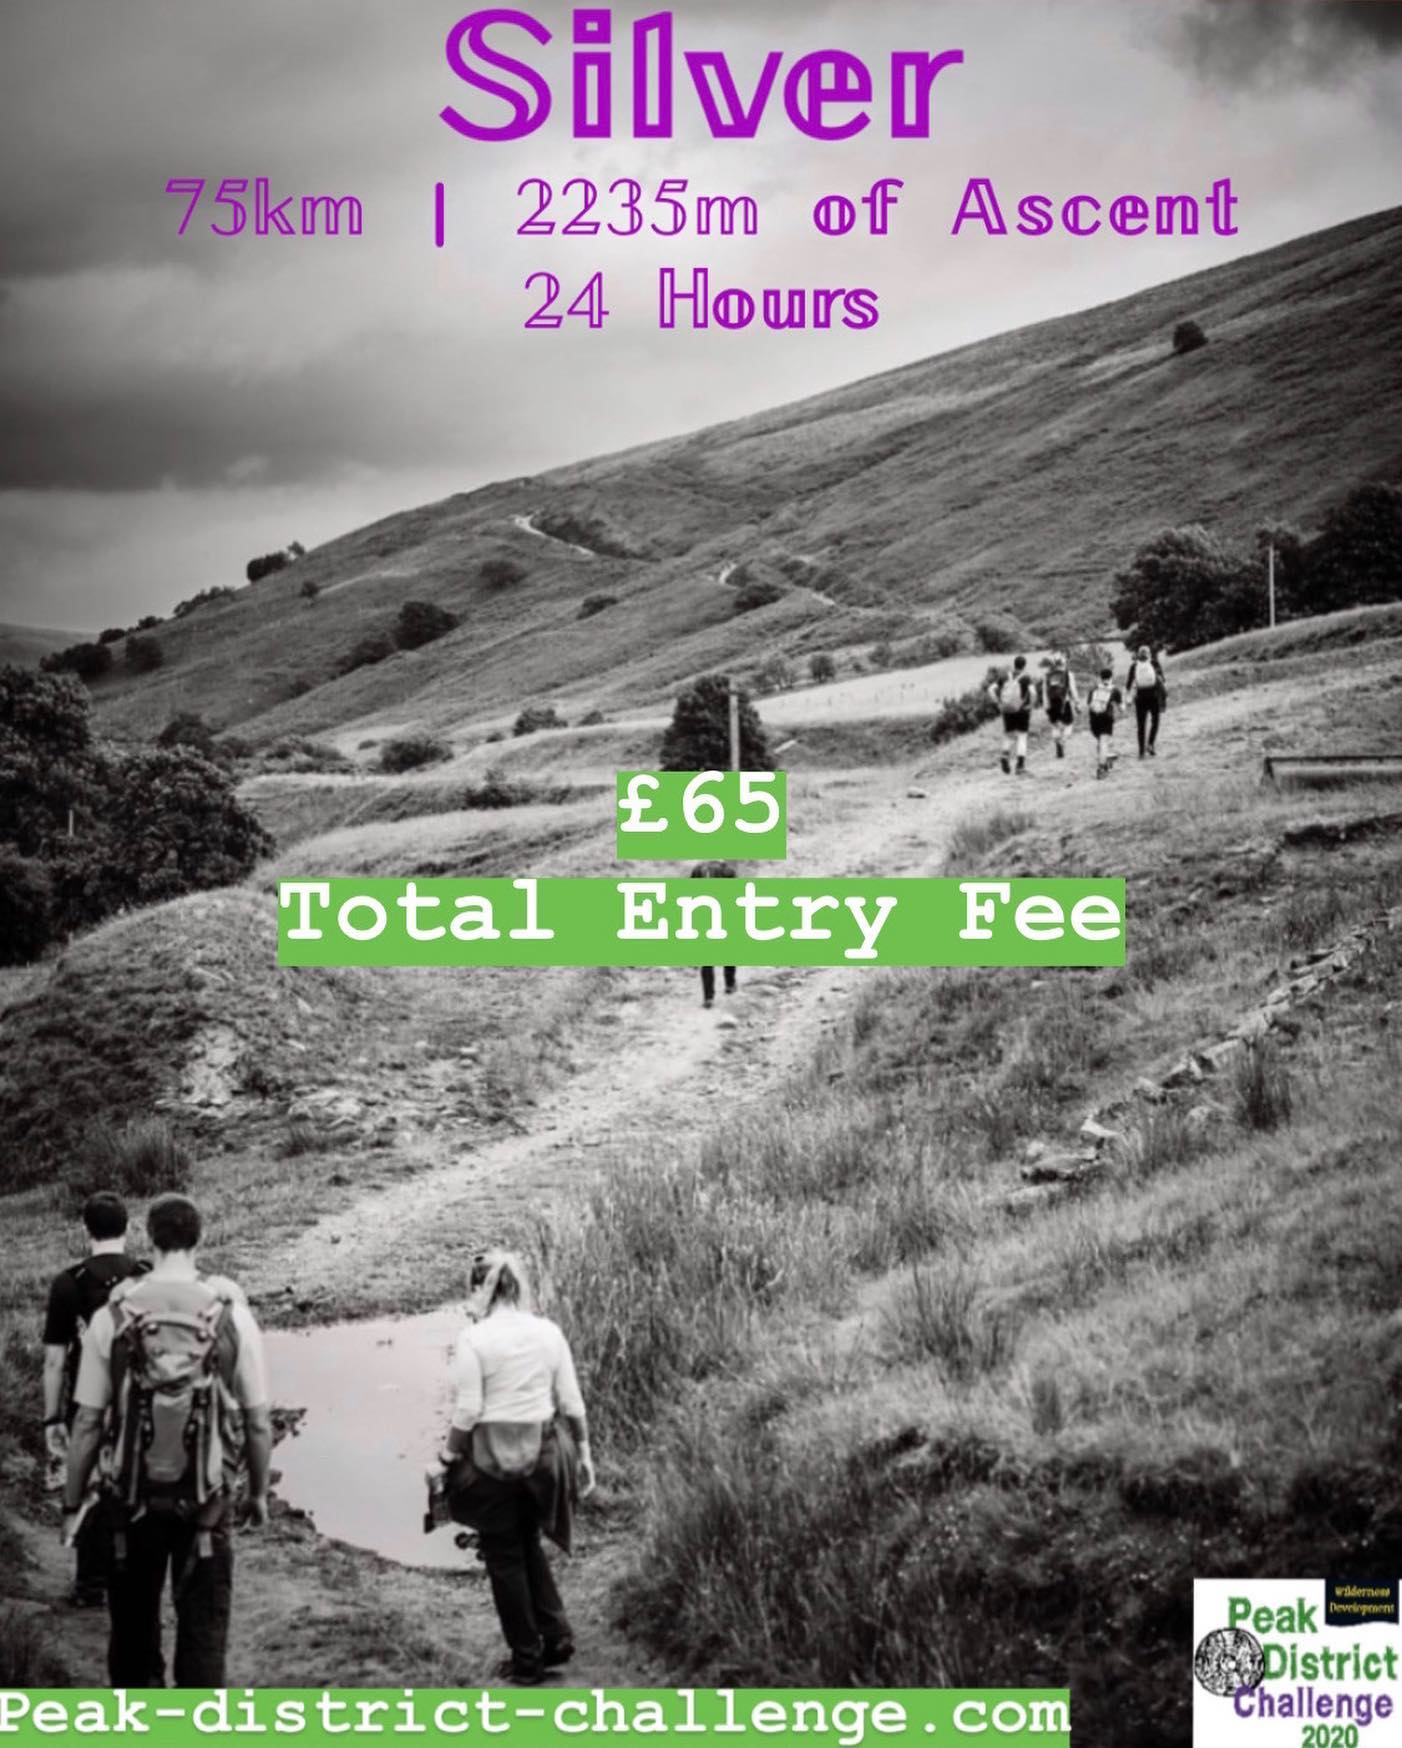 The Peak District Challenge will go ahead on 18-19 September as planned, with a few tweaks to acc...